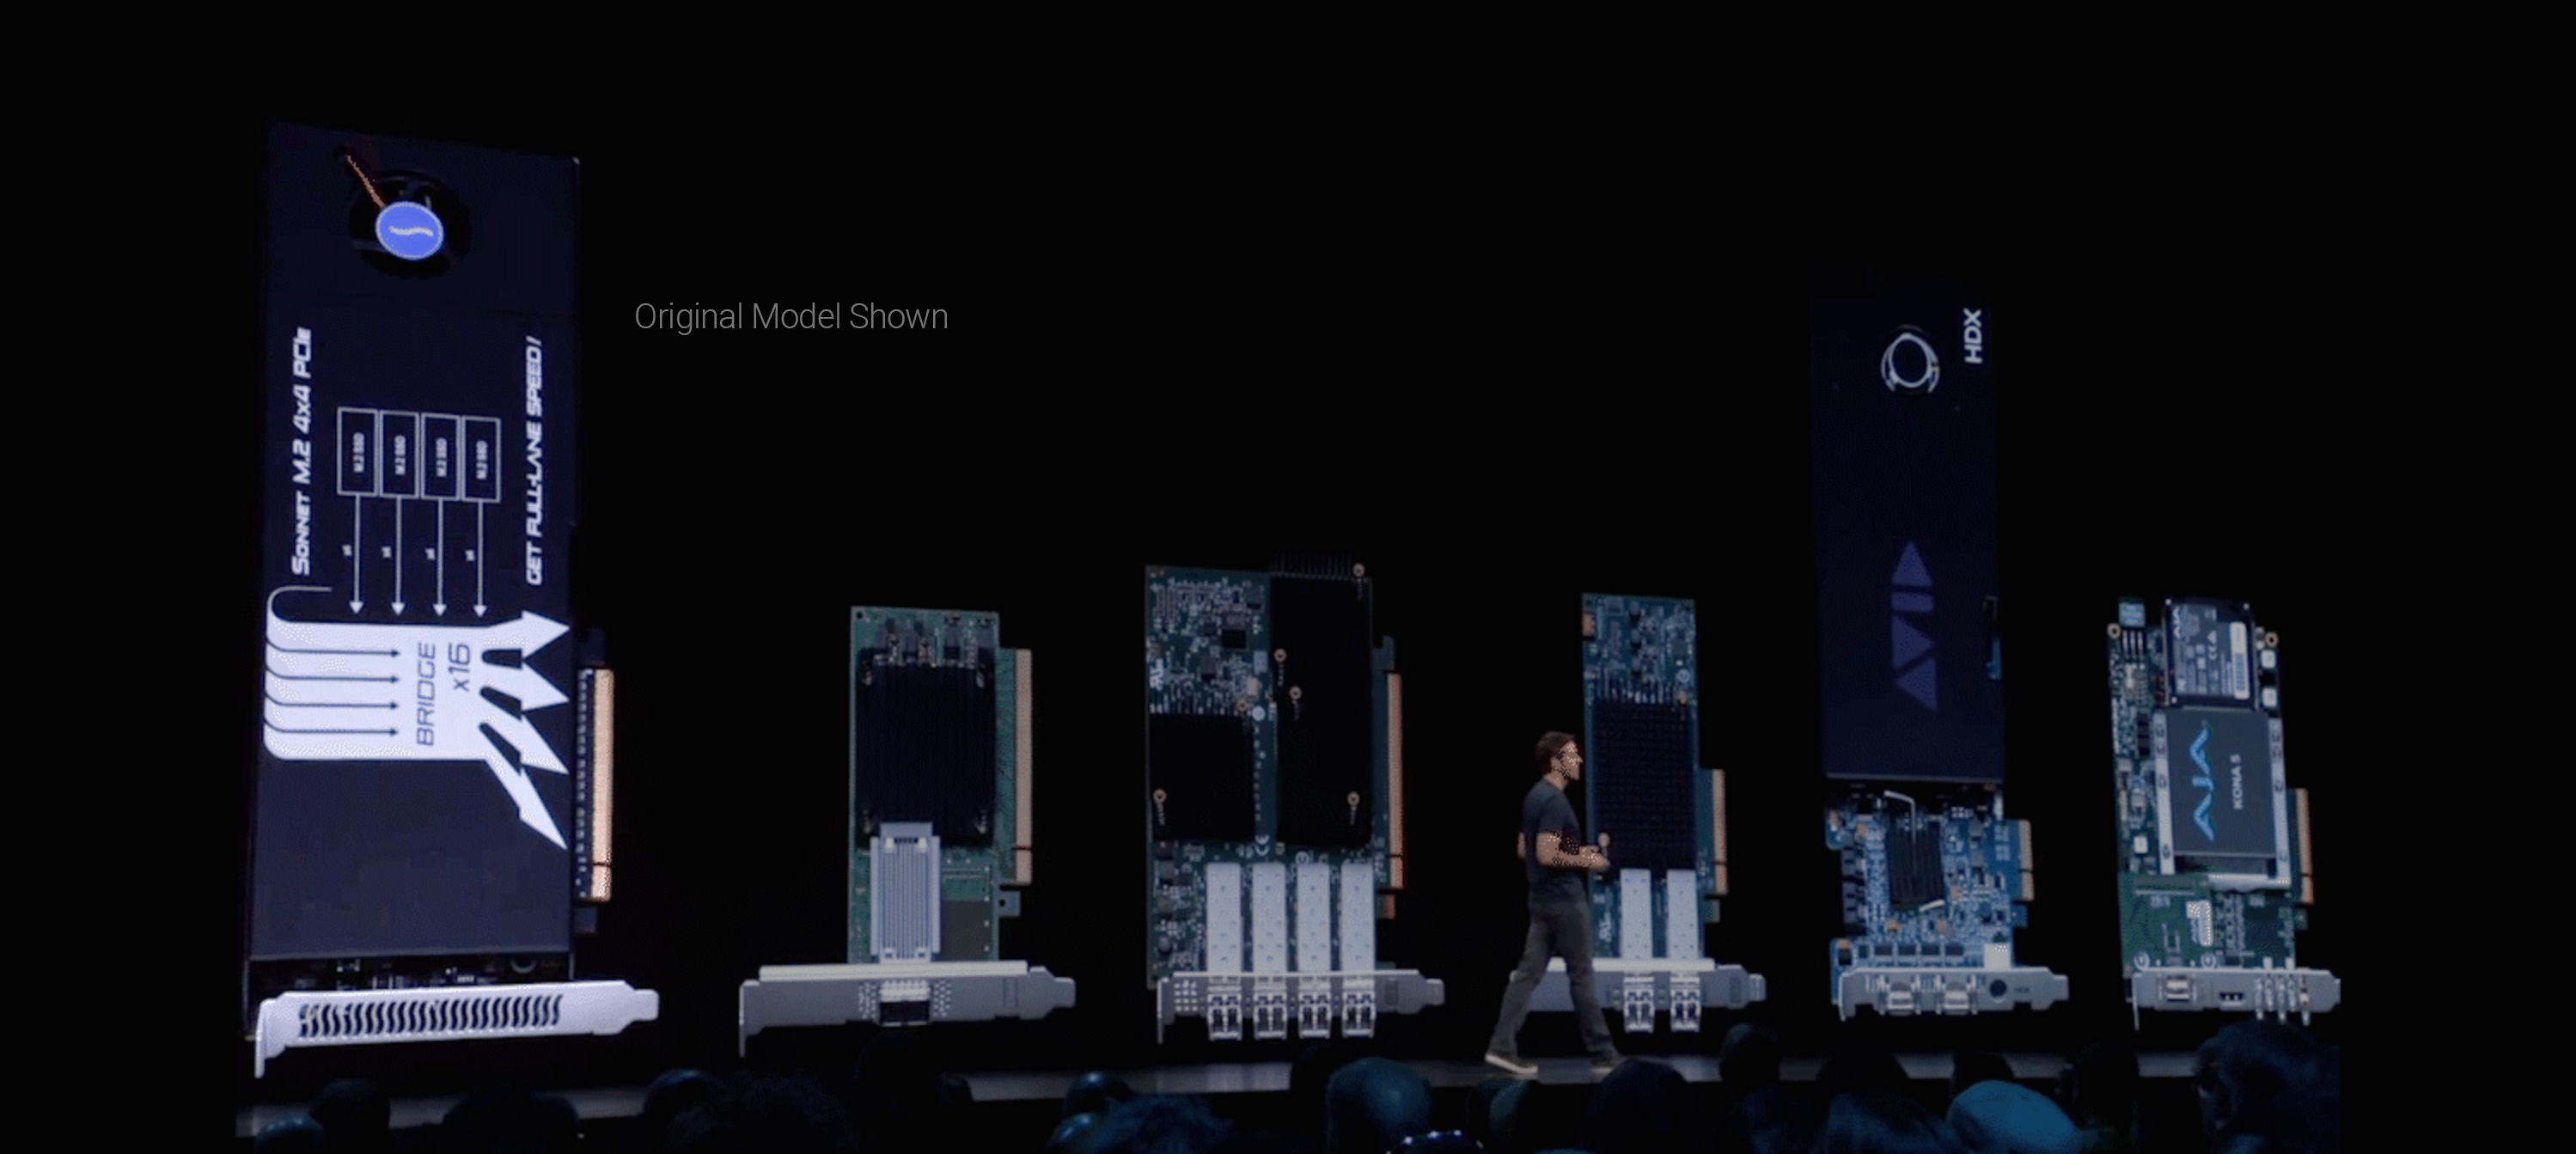 Screenshot of Sonnet M.2 4x4 PCIe Card Featured at Apple's WWDC Conference